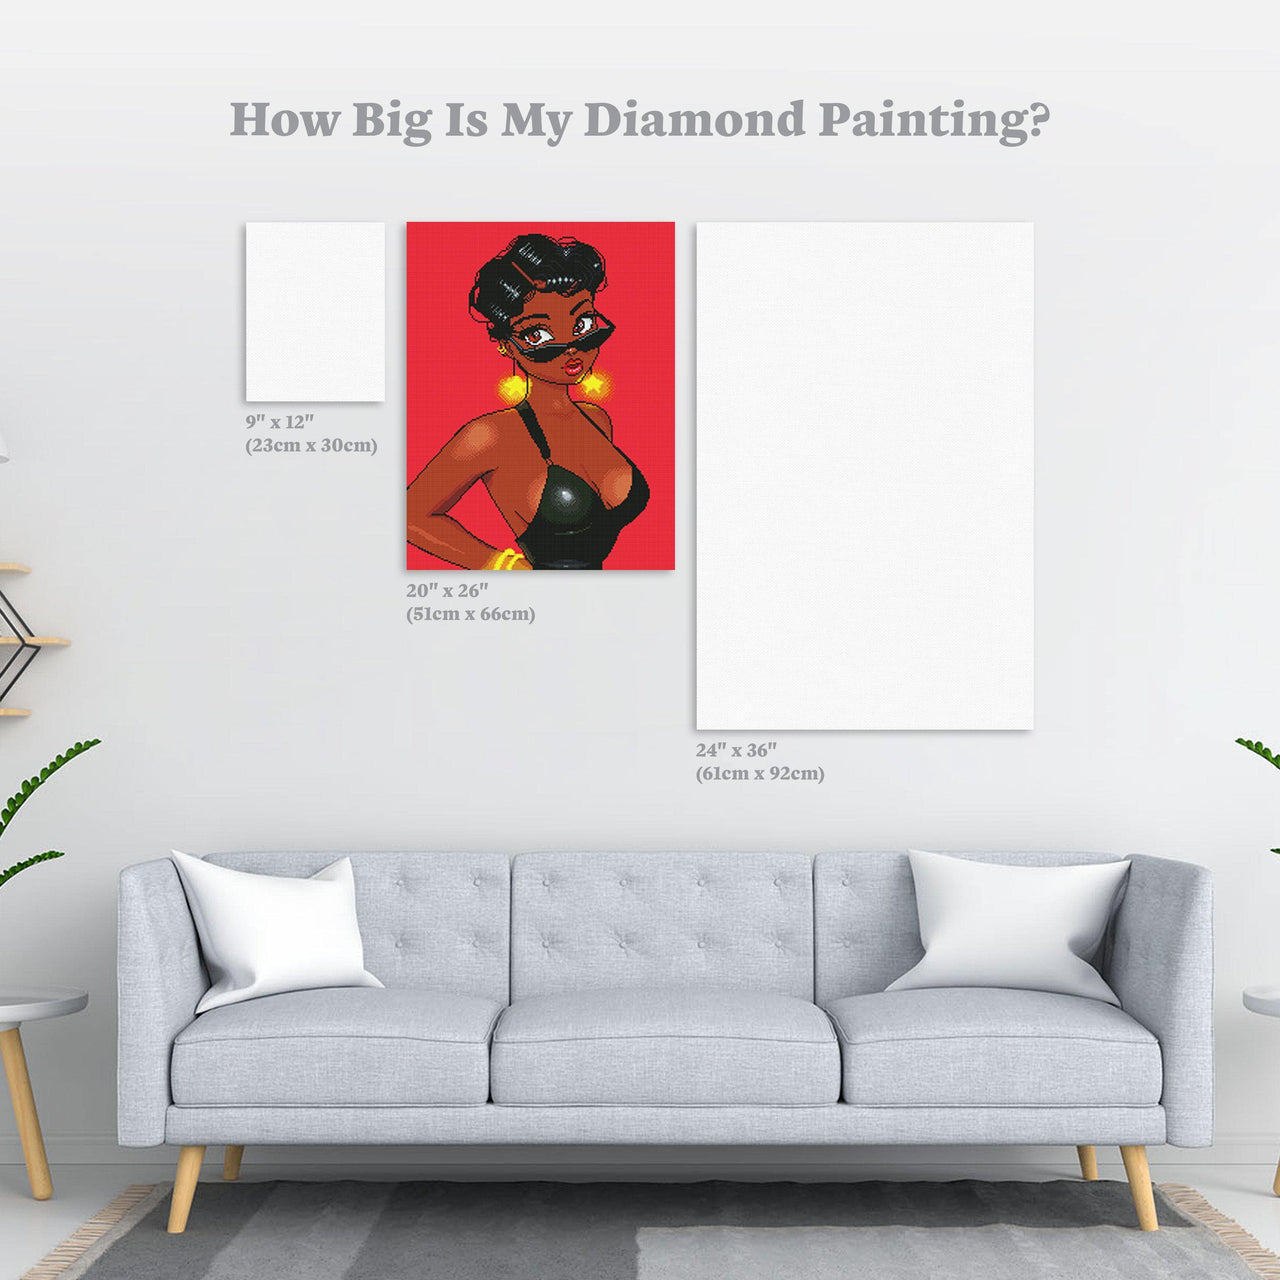 Diamond Painting Black Girl Magic 20" x 26″ (51cm x 66cm) / Round with 30 Colors including 2 ABs / 42535